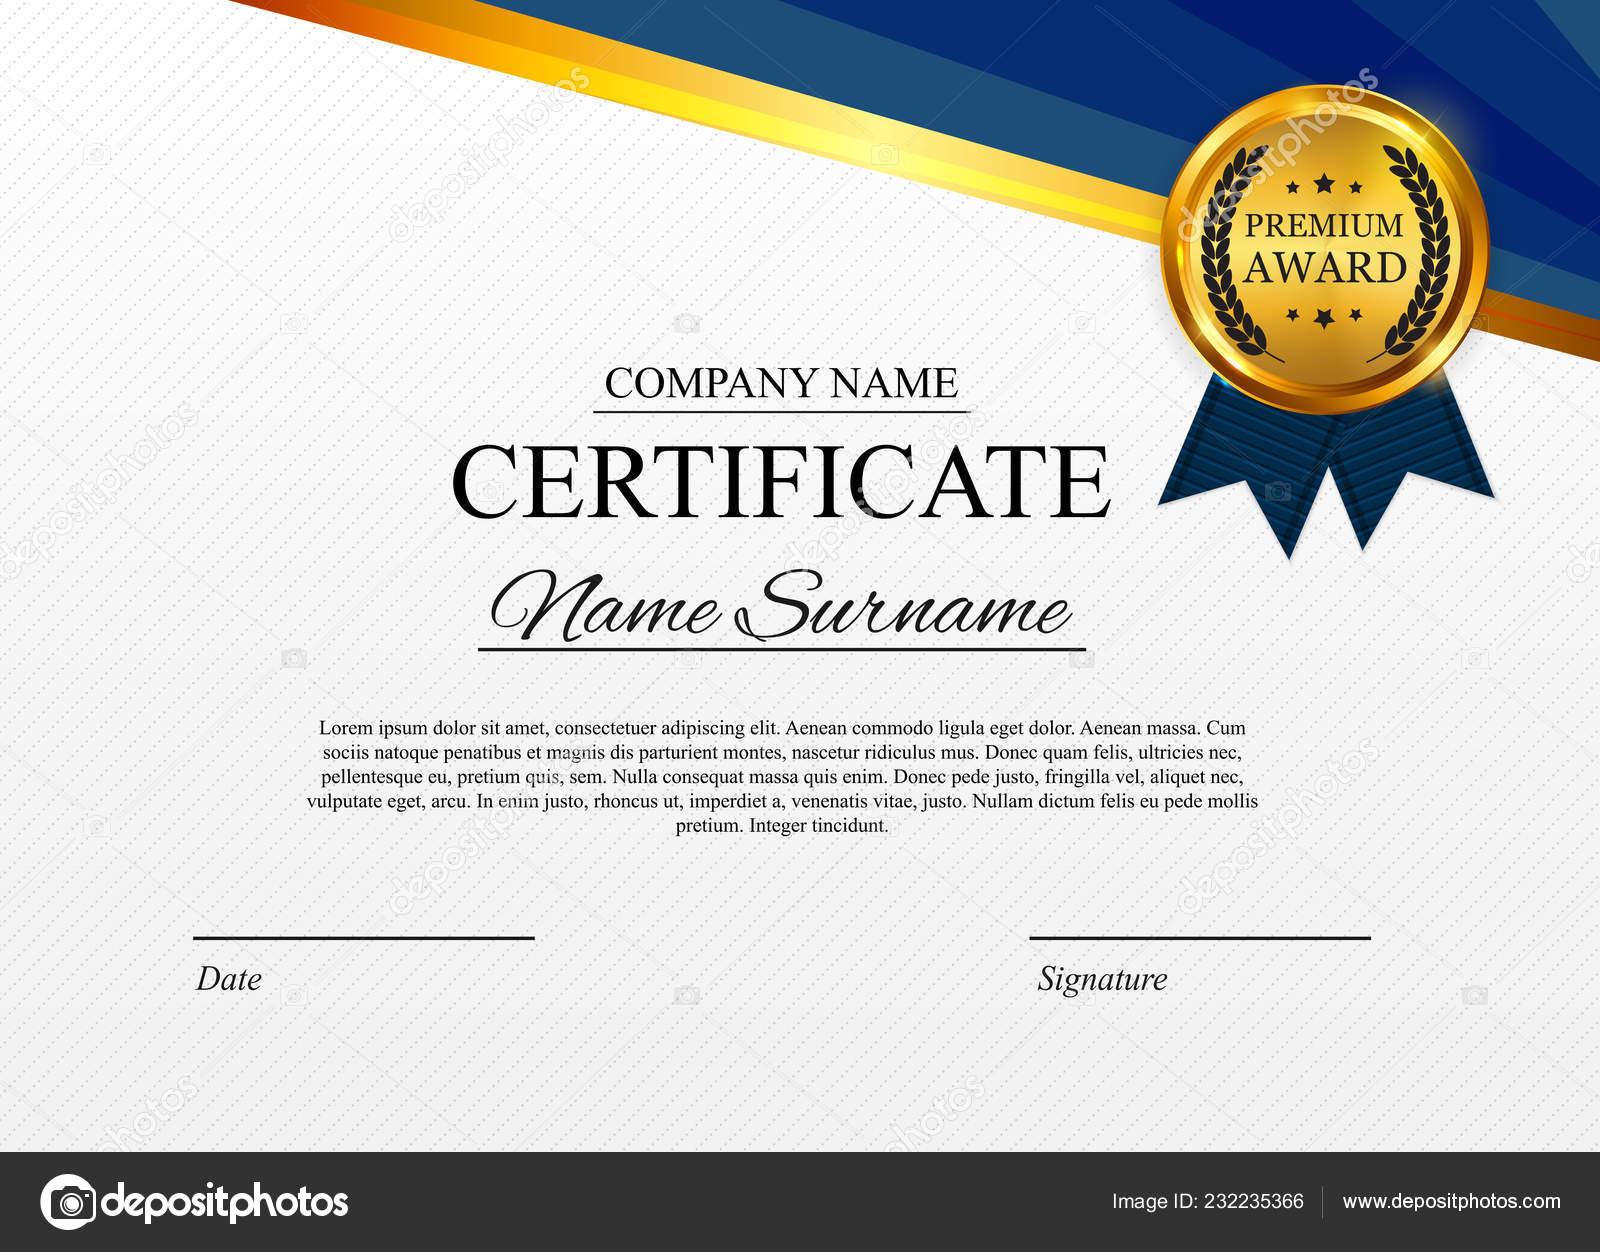 Certificate template Background. Award diploma design blank With Winner Certificate Template